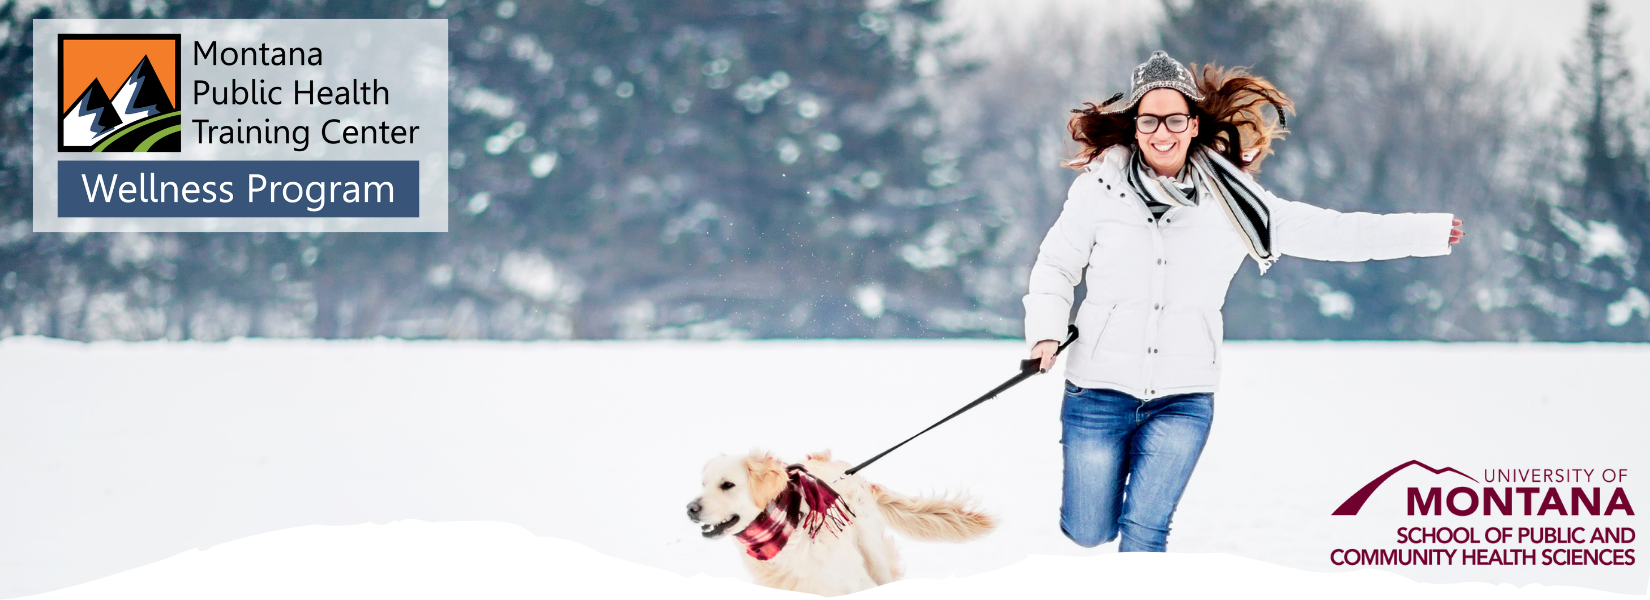 Photo of smiling woman running through snow with a dog. MPHTC and SPCHS logos are visible.